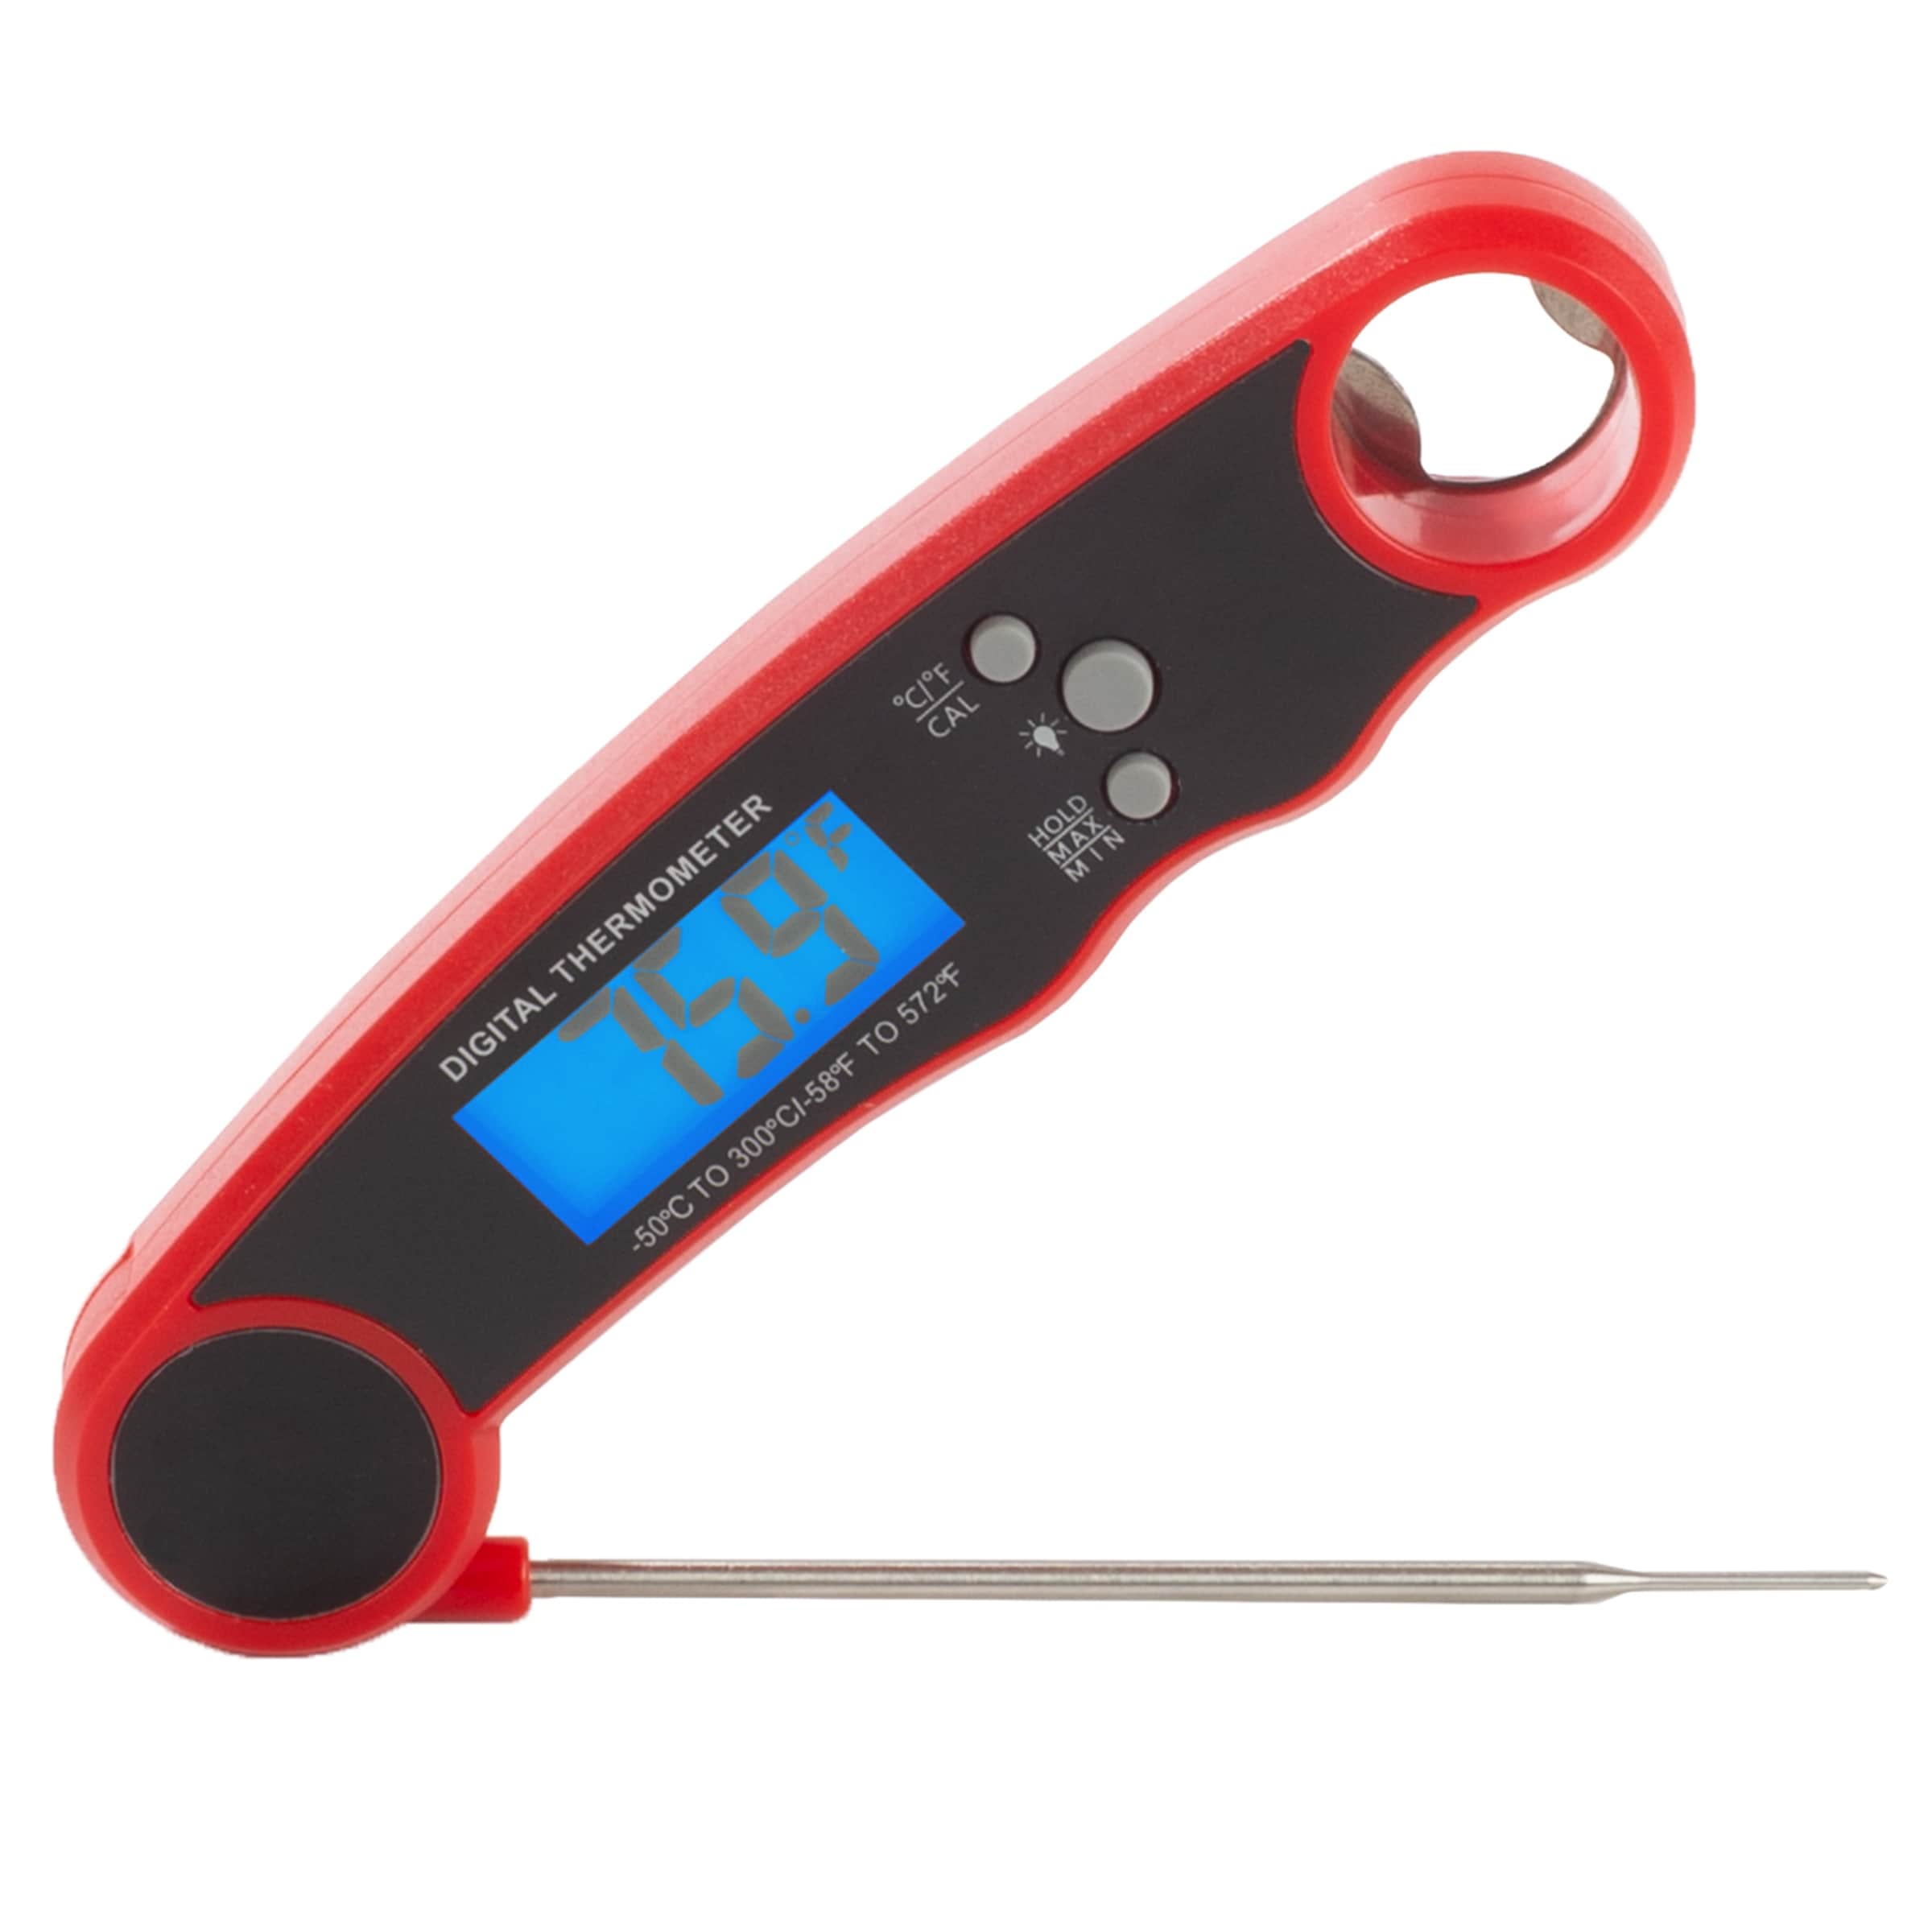 https://ak1.ostkcdn.com/images/products/is/images/direct/88110c8ae08341ef804ace61552f27e9fb321899/Instant-Read-Food-Thermometer---Water-Resistant-Digital-Thermometer-with-Magnetic-Back-by-Home-Complete.jpg